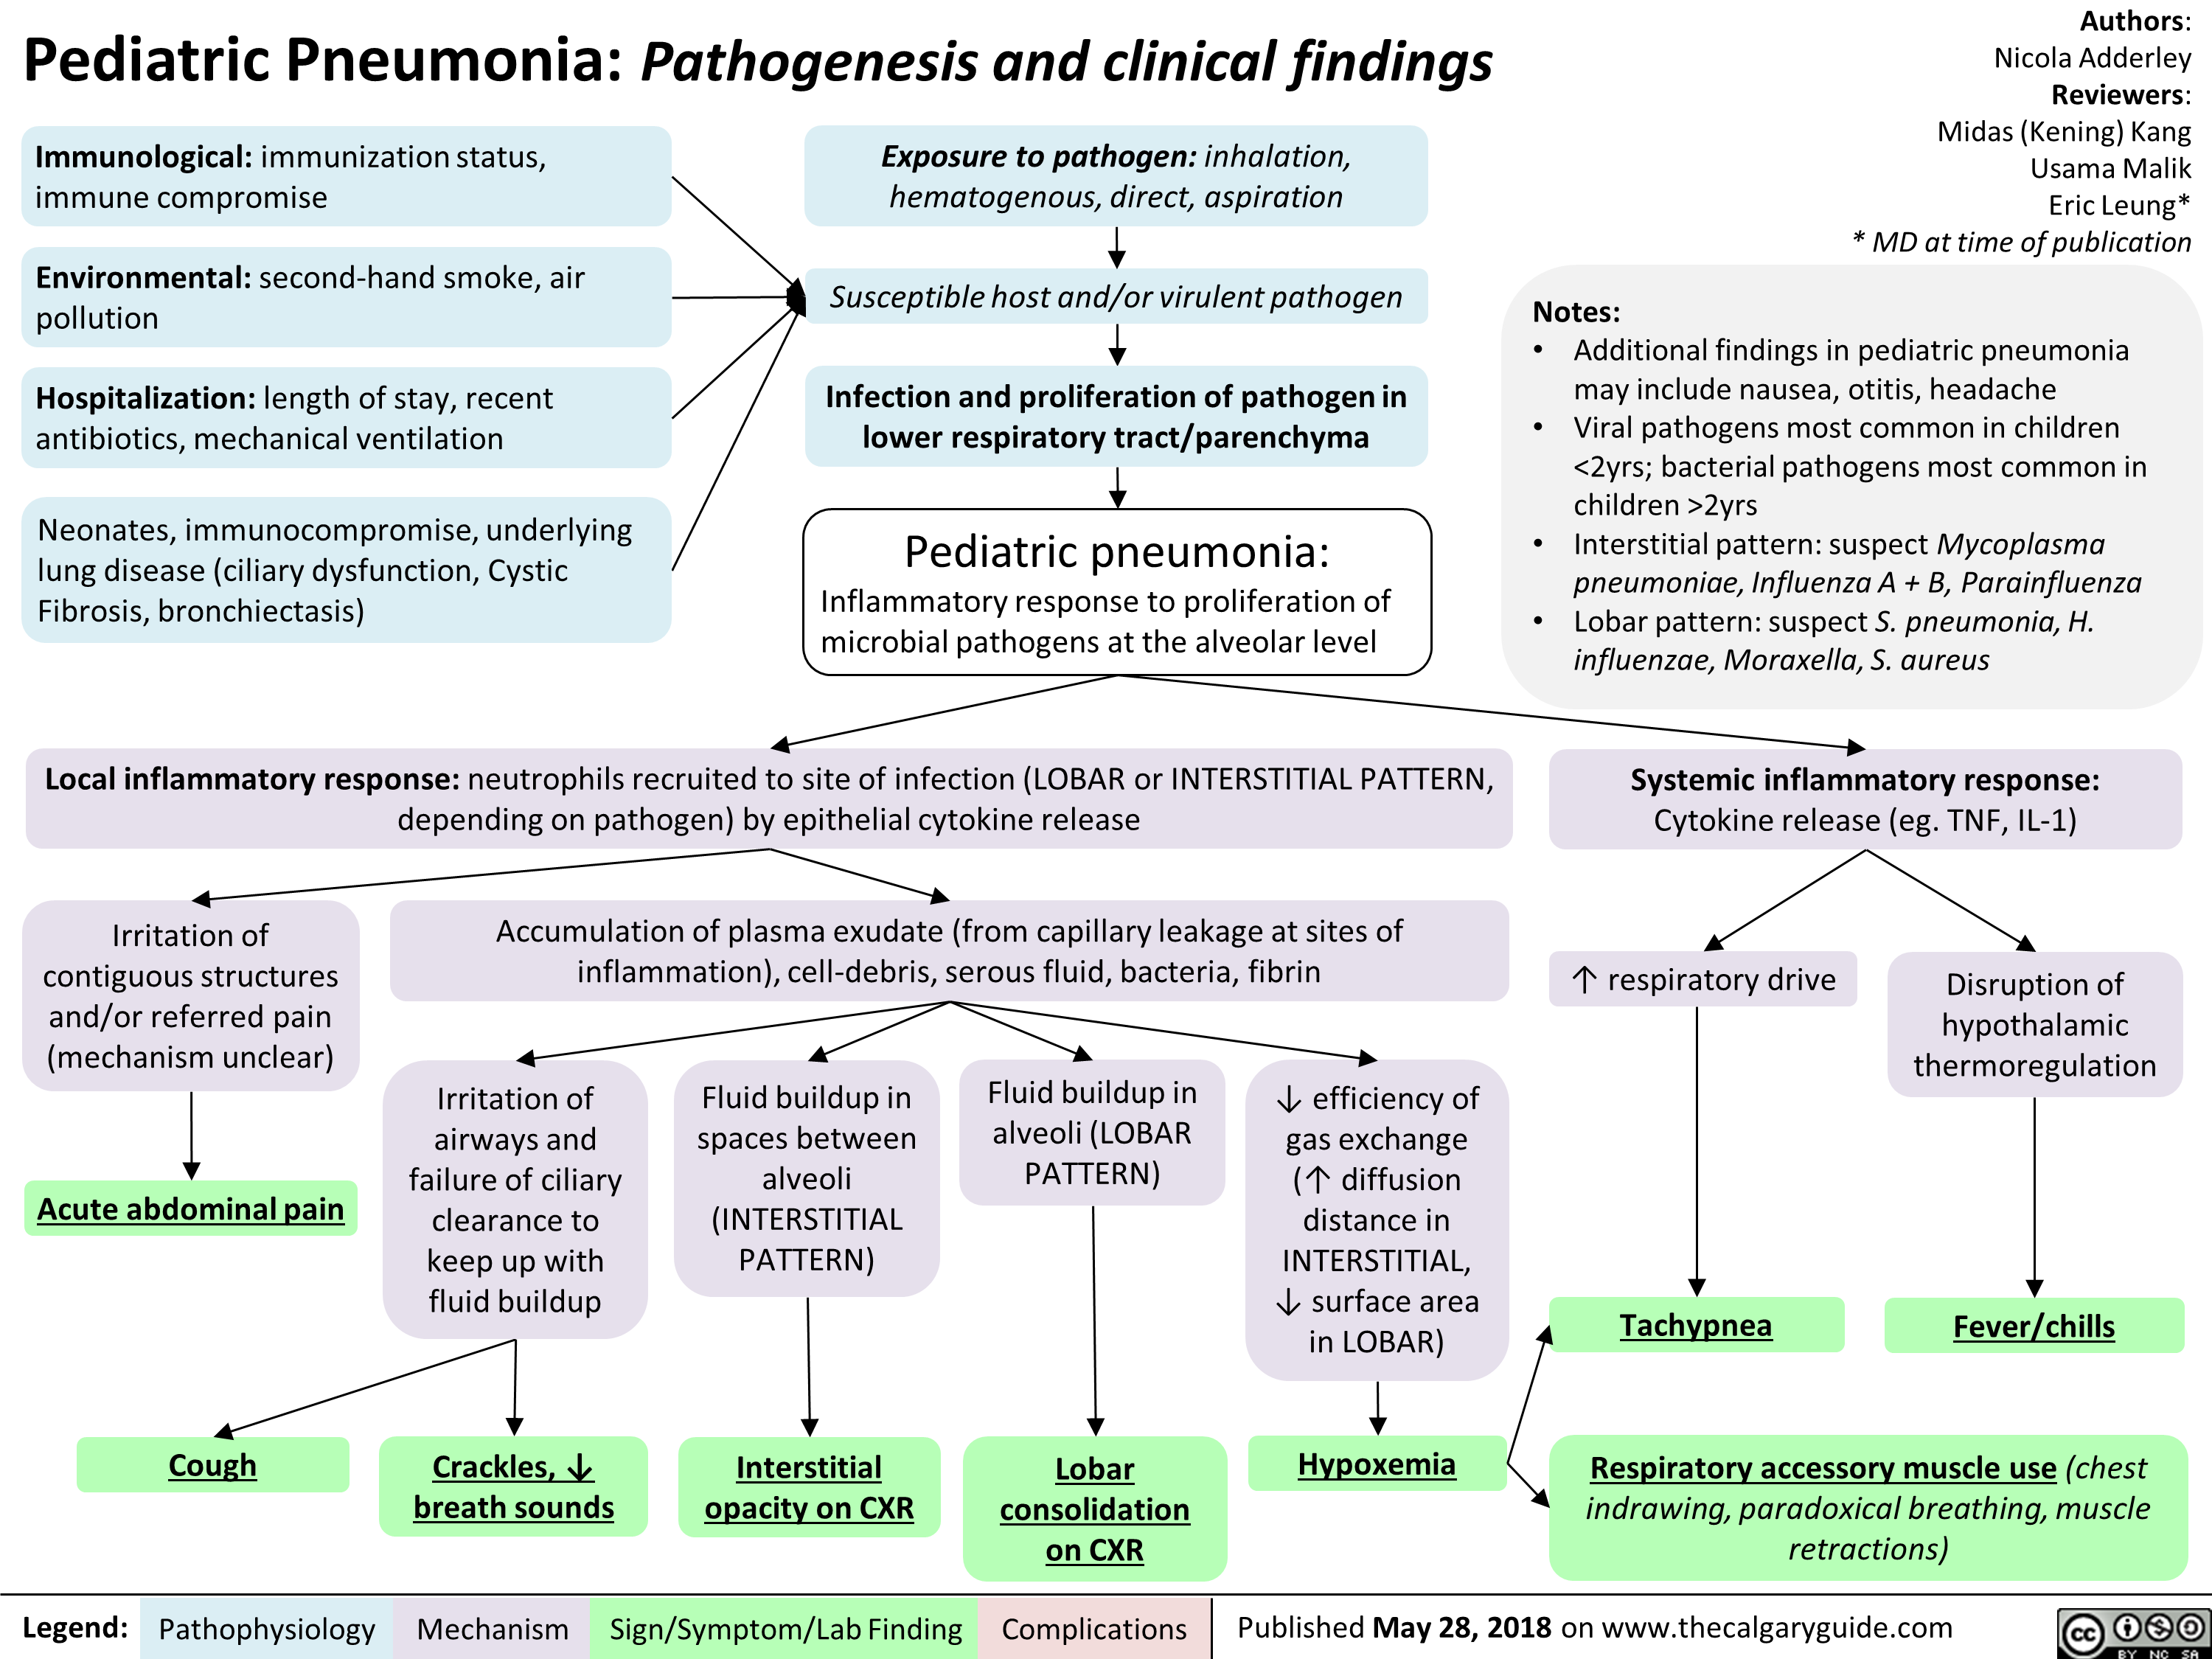 Pediatric pneumonia: Pathogenesis and clinical findings 
Immunological: immunization status, immune compromise 
Environmental: second-hand smoke, air pollution 
Hospitalization: length of stay, recent antibiotics, mechanical ventilation 
Neonates, immunocompromise, underlying lung disease (ciliary dysfunction, Cystic Fibrosis, bronchiectasis) 

Exposure to pathogen: inhalation, hematogenous, direct, aspiration 
Susceptible host and/or virulent pathogen 
Infection and proliferation of pathogen in lower respiratory tract/parenchyma 
Pediatric pneumonia: Inflammatory response to proliferation of microbial pathogens at the alveolar level 
Authors: Nicola Adderley Reviewers: Midas (Kening) Kang Usama Malik Eric Leung* * MD at time of publication 
Notes: • Additional findings in pediatric pneumonia may include nausea, otitis, headache • Viral pathogens most common in children <2yrs; bacterial pathogens most common in children >2yrs • Interstitial pattern: suspect Mycoplasma pneumoniae, Influenza A + B, Parainfluenza • Lobar pattern: suspect S. pneumonia, H. influenzae, Moraxella, S. aureus 
Local inflammatory response: neutrophils recruited to site of infection (LOBAR or INTERSTITIAL PATTERN, depending on pathogen) by epithelial cytokine release 
At-- Irritation of contiguous structures and/or referred pain (mechanism unclear) 
Acute abdominal pain 
Accumulation of plasma exudate (from capillary leakage at sites of inflammation), cell-debris, serous fluid, bacteria, fibrin 
Irritation of airways and failure of ciliary clearance to keep up with fluid buildup Cough  
Legend: 
Crack es, 4•  breath sounds 
Pathophysiology Mechanism 
Fluid buildup in spaces between alveoli (INTERSTITIAL PATTERN) 
Interstitial  opacity on CXR 
Fluid buildup in alveoli (LOBAR PATTERN) 
J, efficiency of gas exchange (I` diffusion distance in INTERSTITIAL, J, surface area in LOBAR) 

Lobar  consolidation on CXR  
Sign/Symptom/Lab Finding 
Complications 
Hypoxemia 
Systemic inflammatory response: 
Cytokine release (eg. TNF, IL-1) 
1` respiratory drive 
• 
Tachypnea 
Disruption of hypothalamic thermoregulation 
Fever/chills 
Respiratory accessory muscle use (chest indrawing, paradoxical breathing, muscle retractions) 